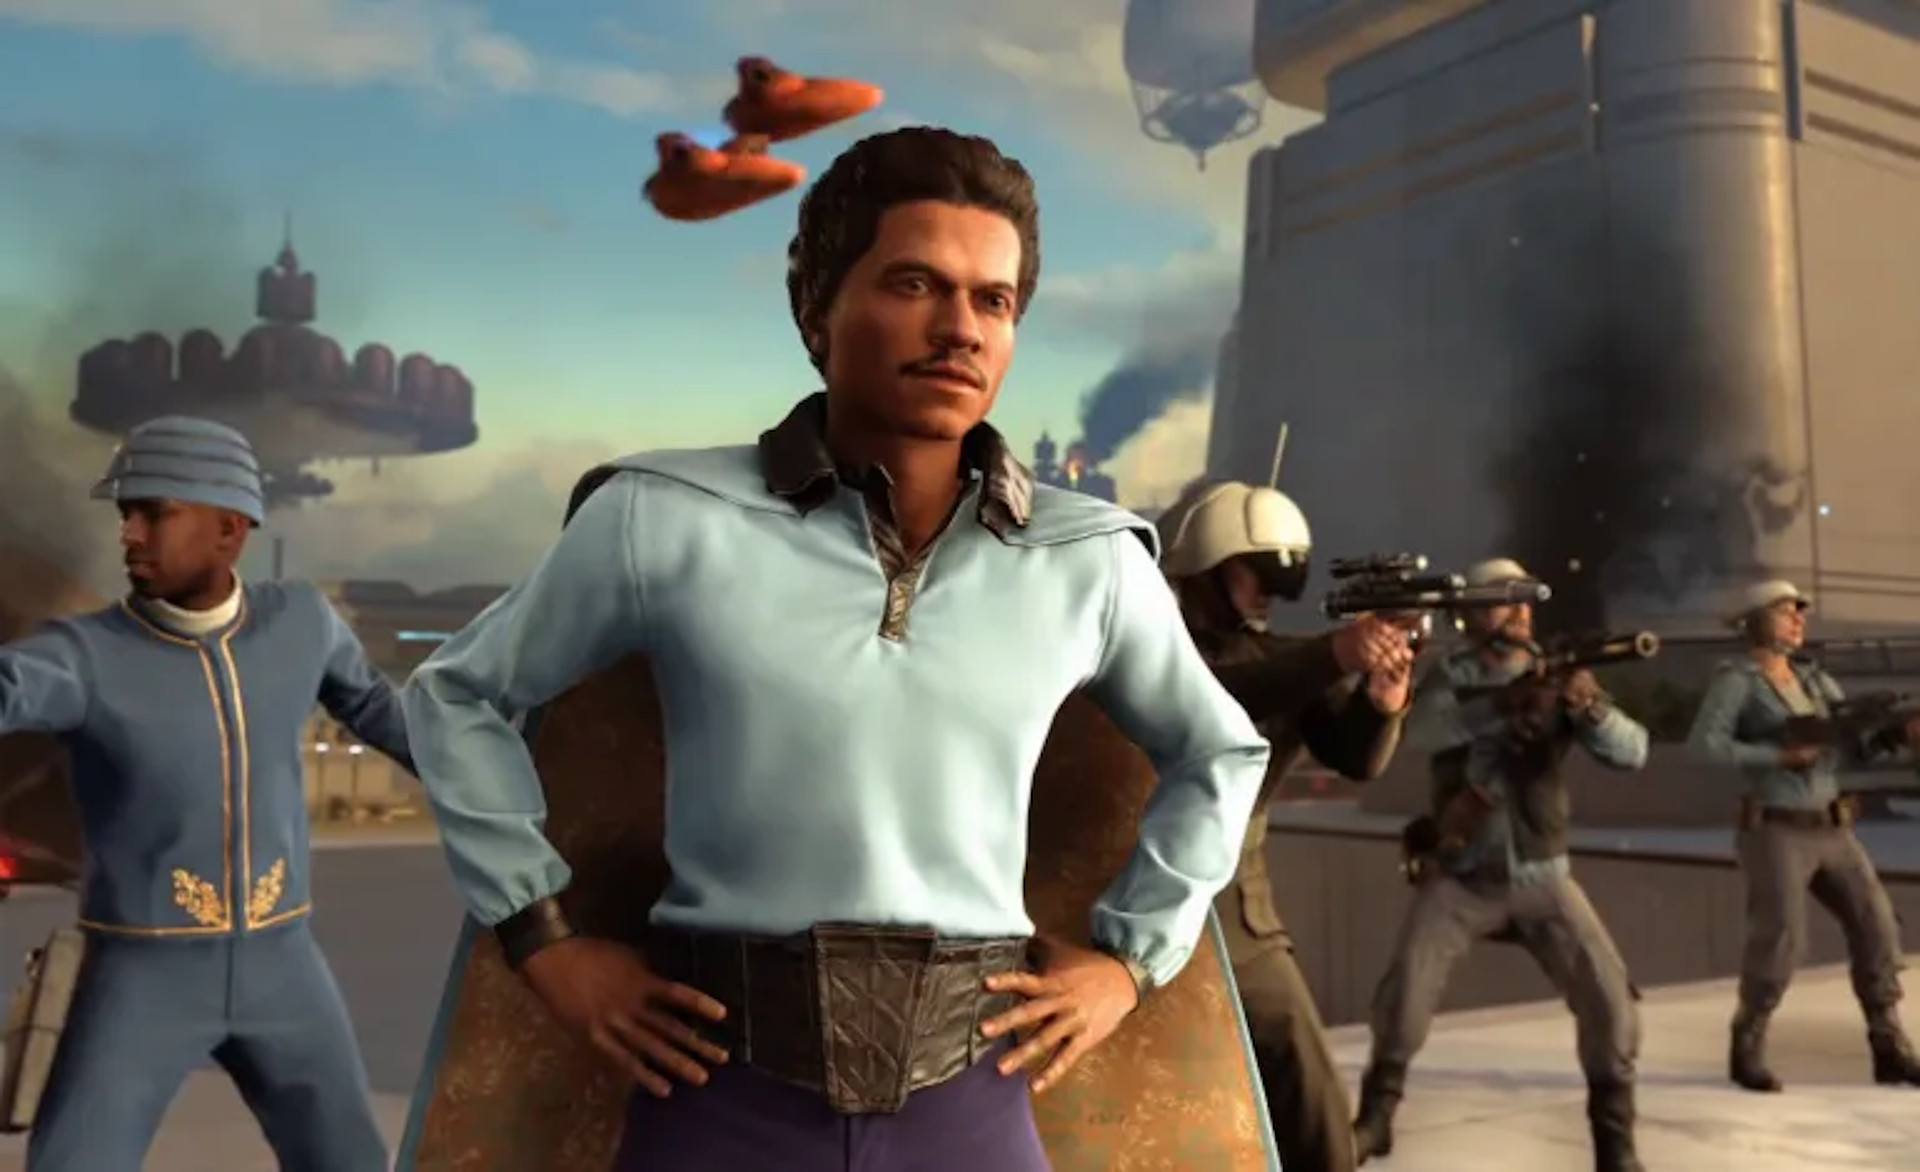  Star Wars Outlaws' $40 season pass comes with 2 story packs, including a run-in with Lando Calrissian later this year 